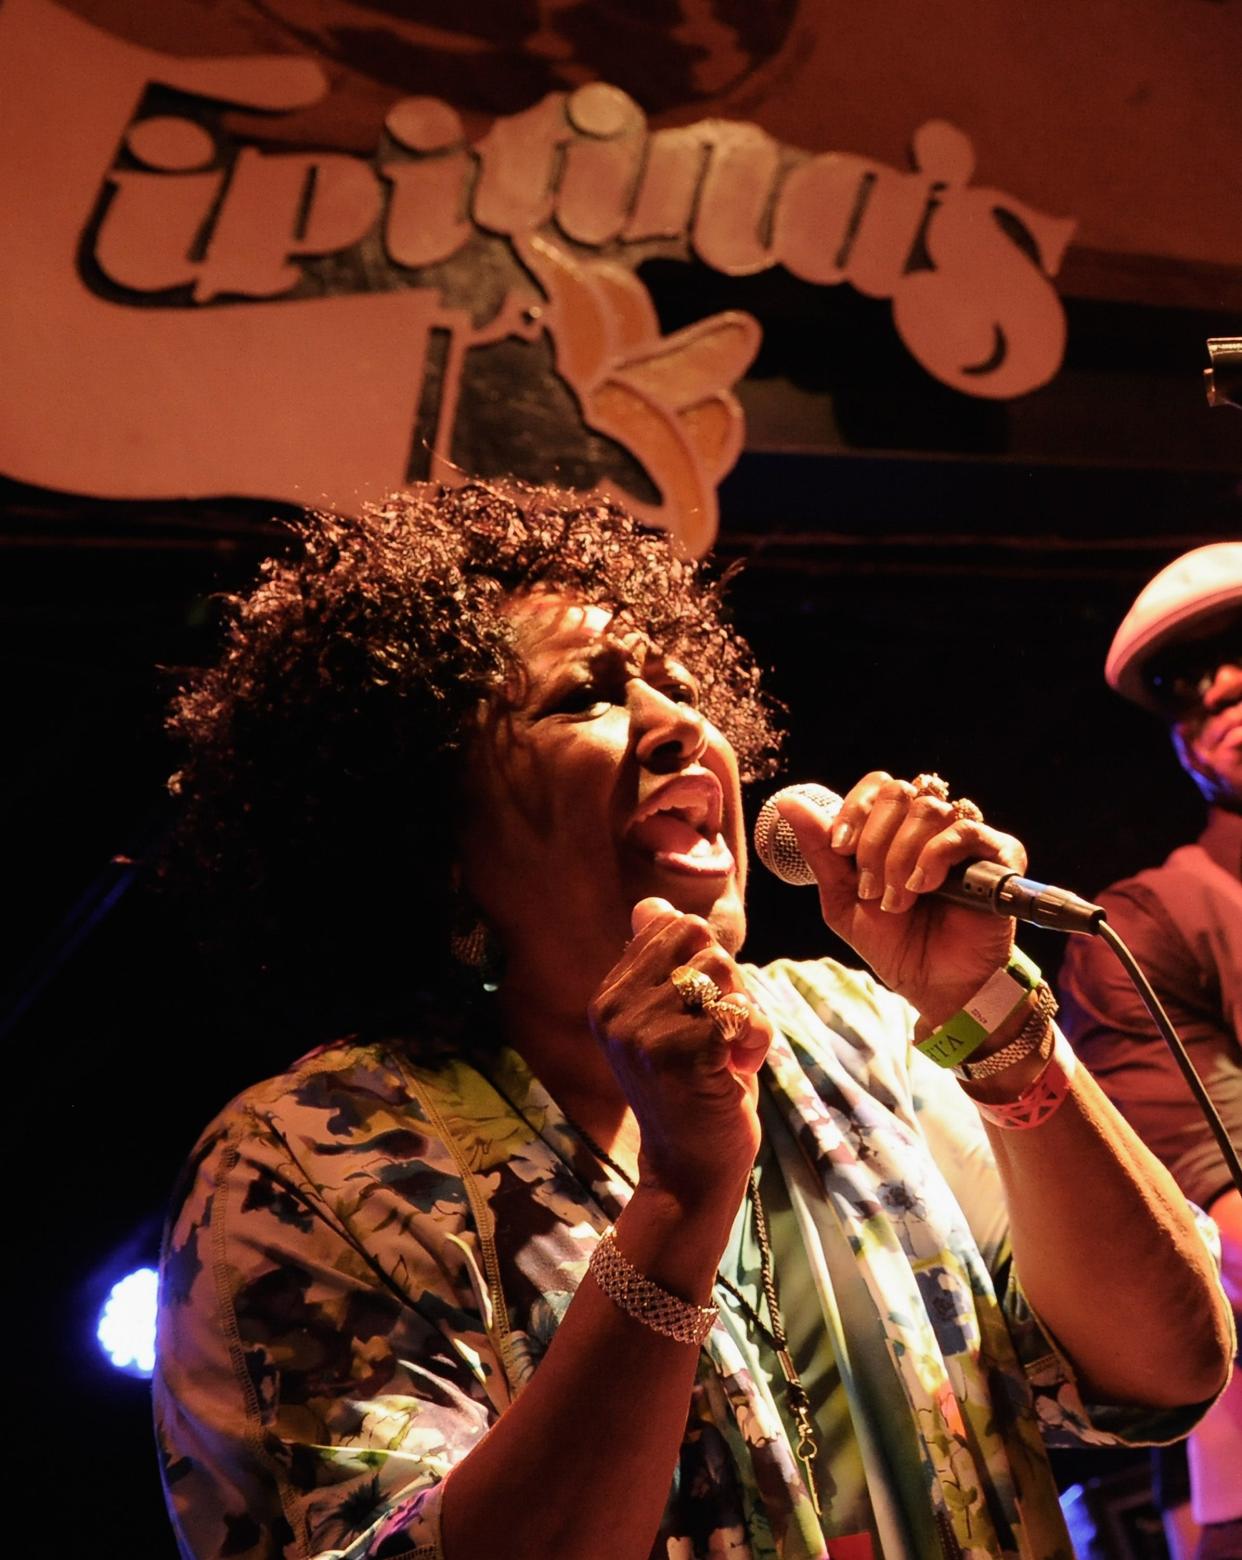 Jean Knight performs with Big Sam's Funky Nation as part of Tipitina's Foundation's 11th Annual Instruments A Comin' on April 30, 2012 in New Orleans.